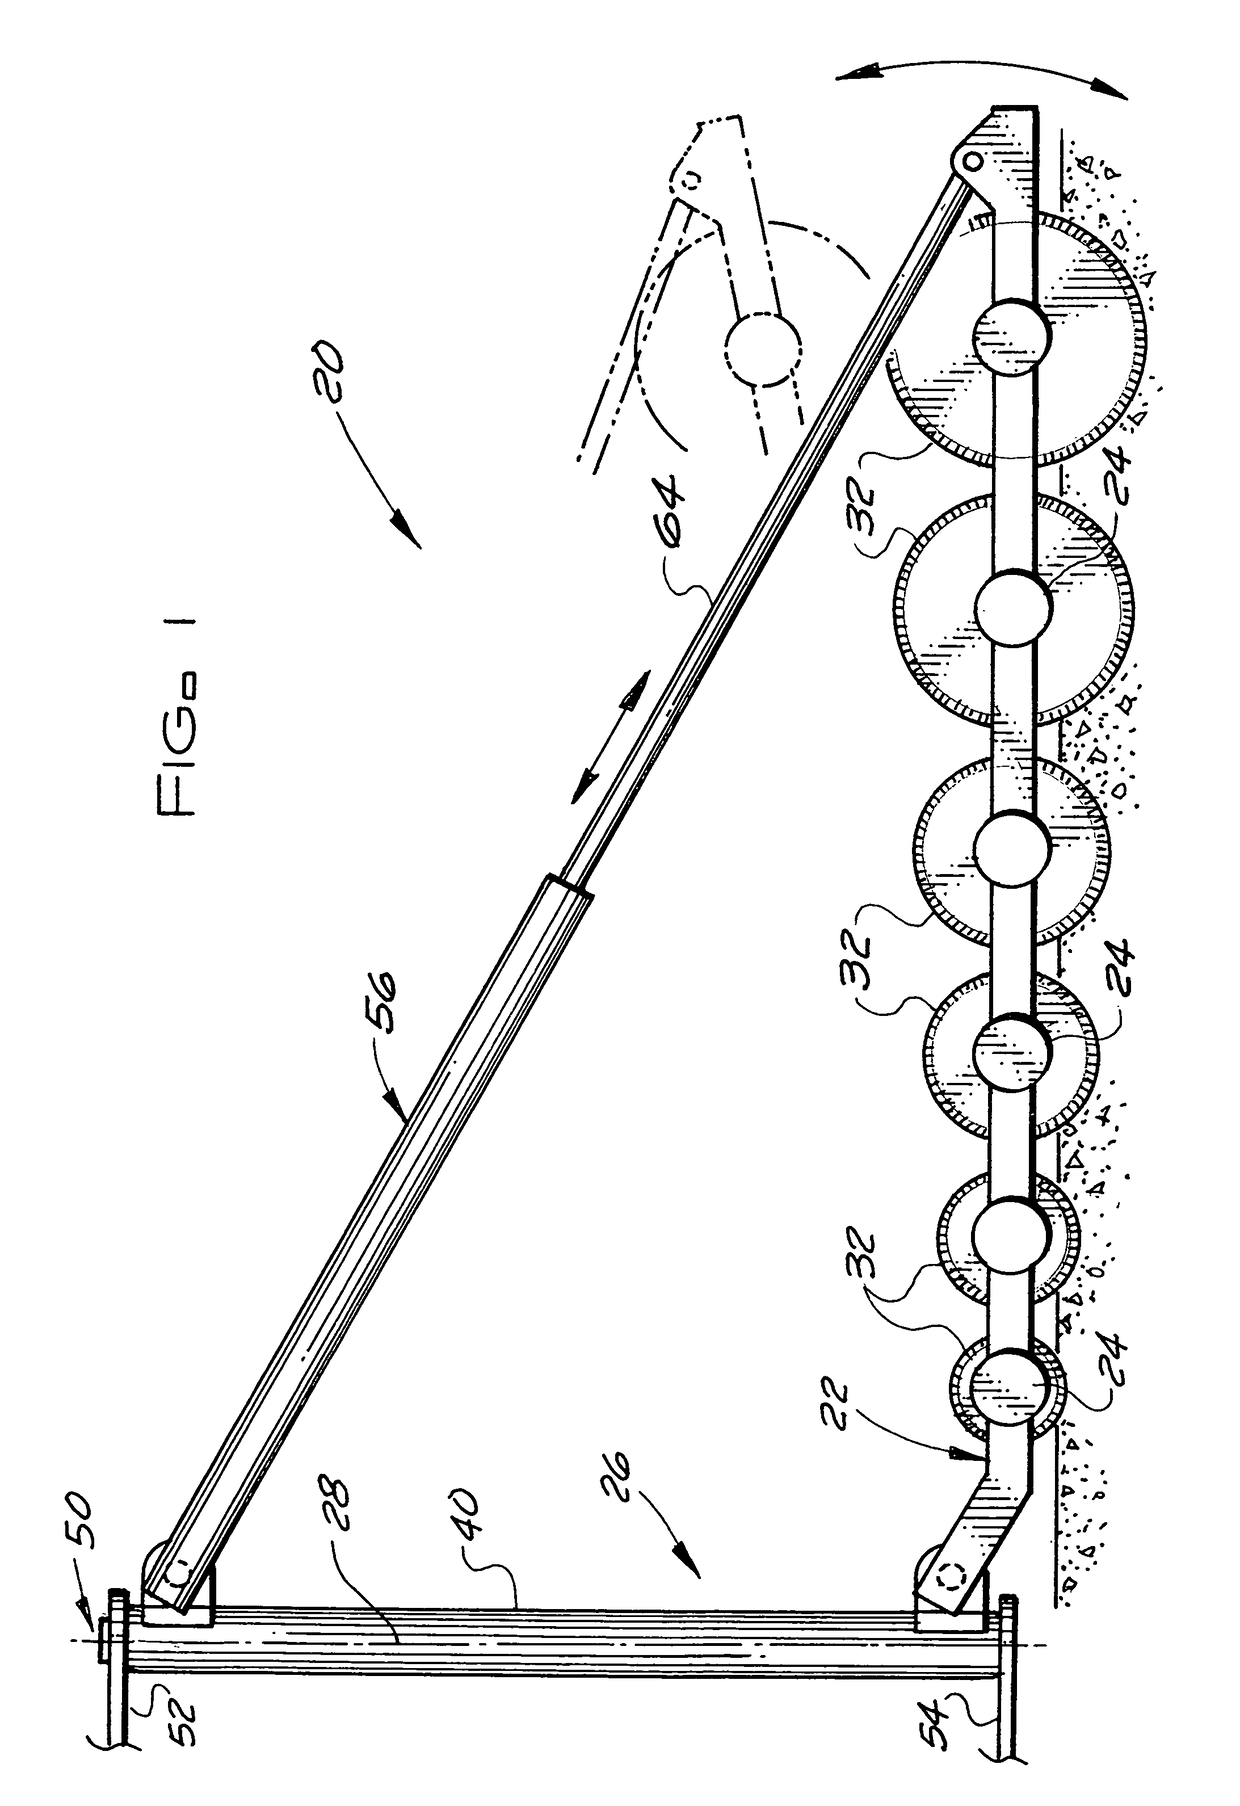 Pavement cutting apparatus and method